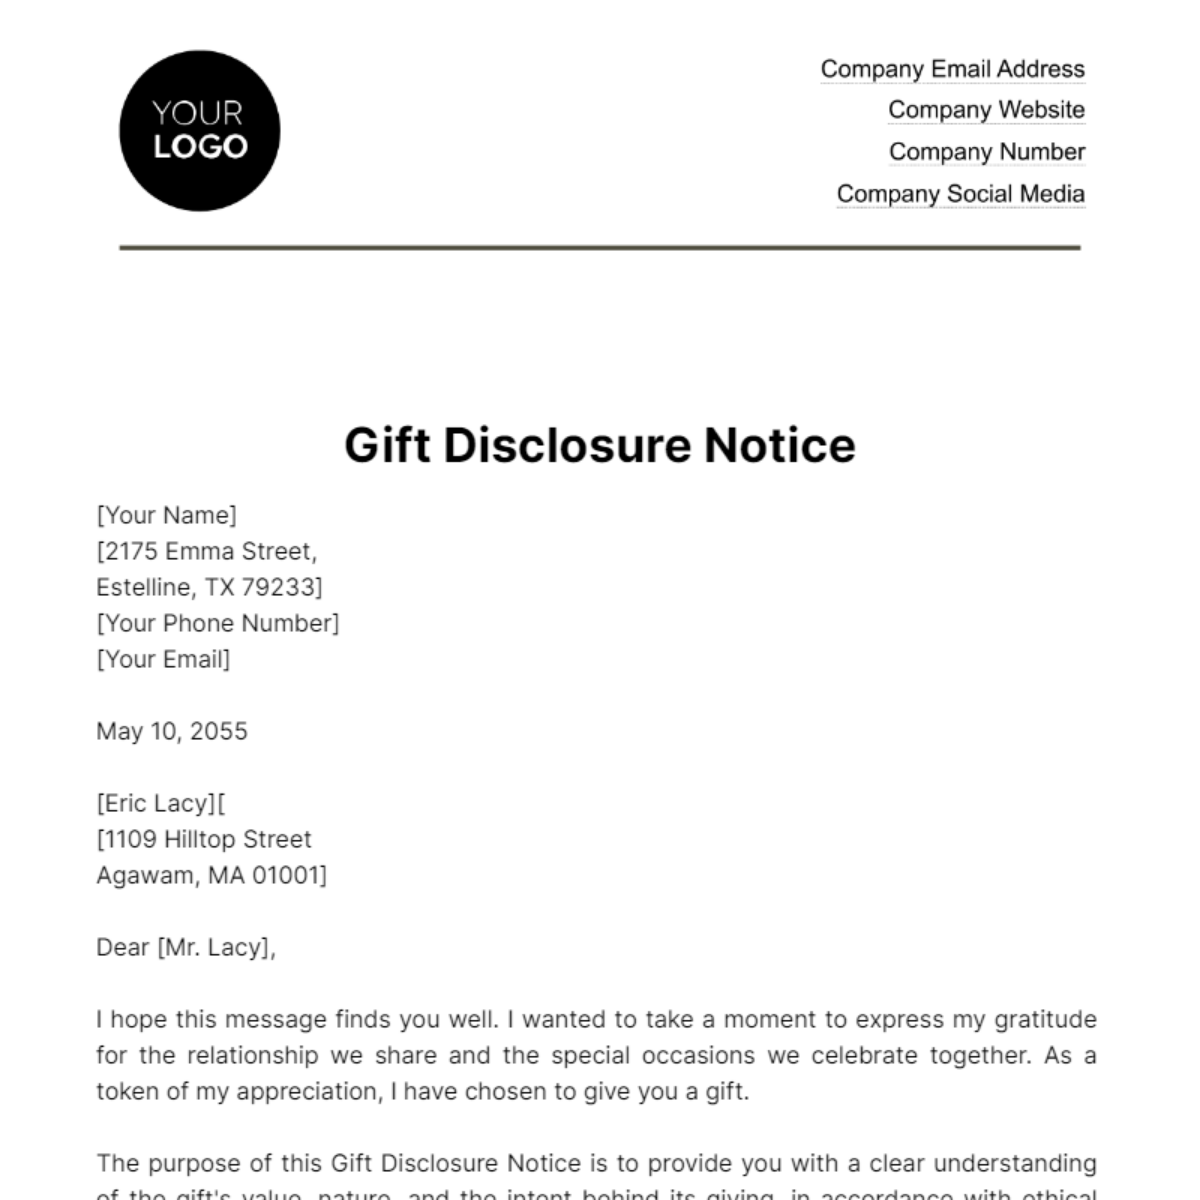 Gift Disclosure Notice HR Template